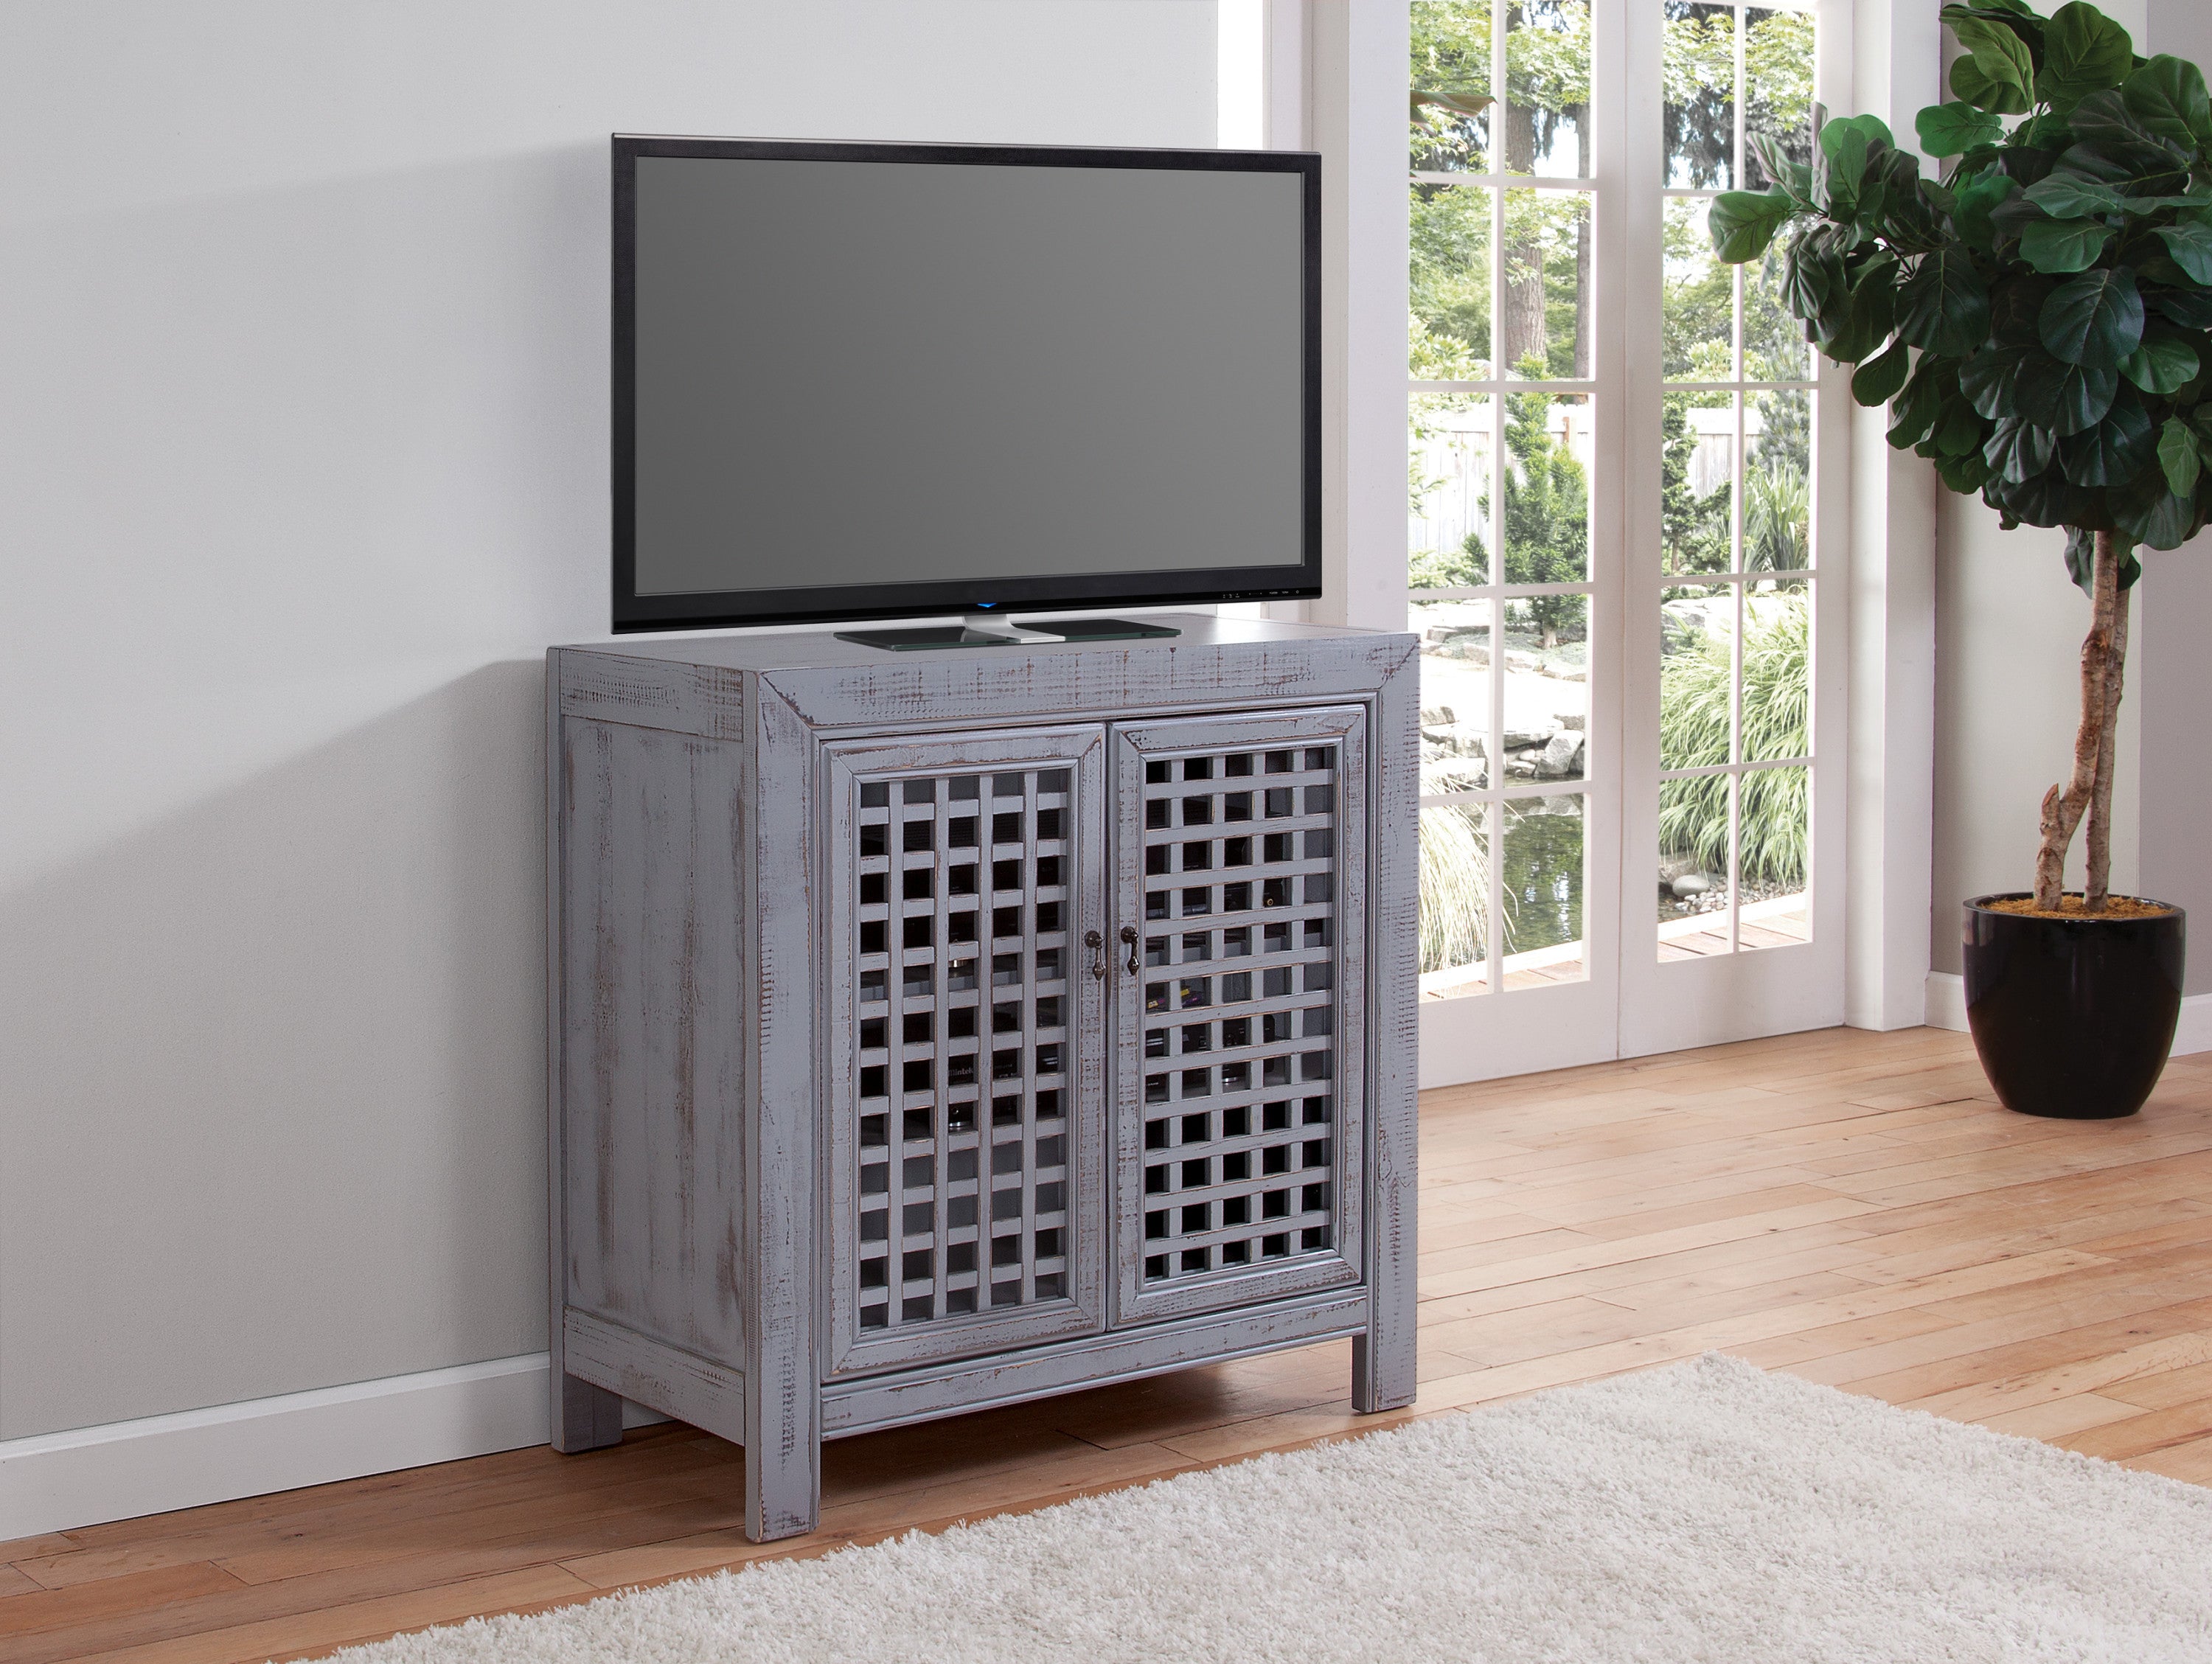 Farmhouse Inspired Accent Cabinet - Lattice Work Front - Distressed Grey Finish